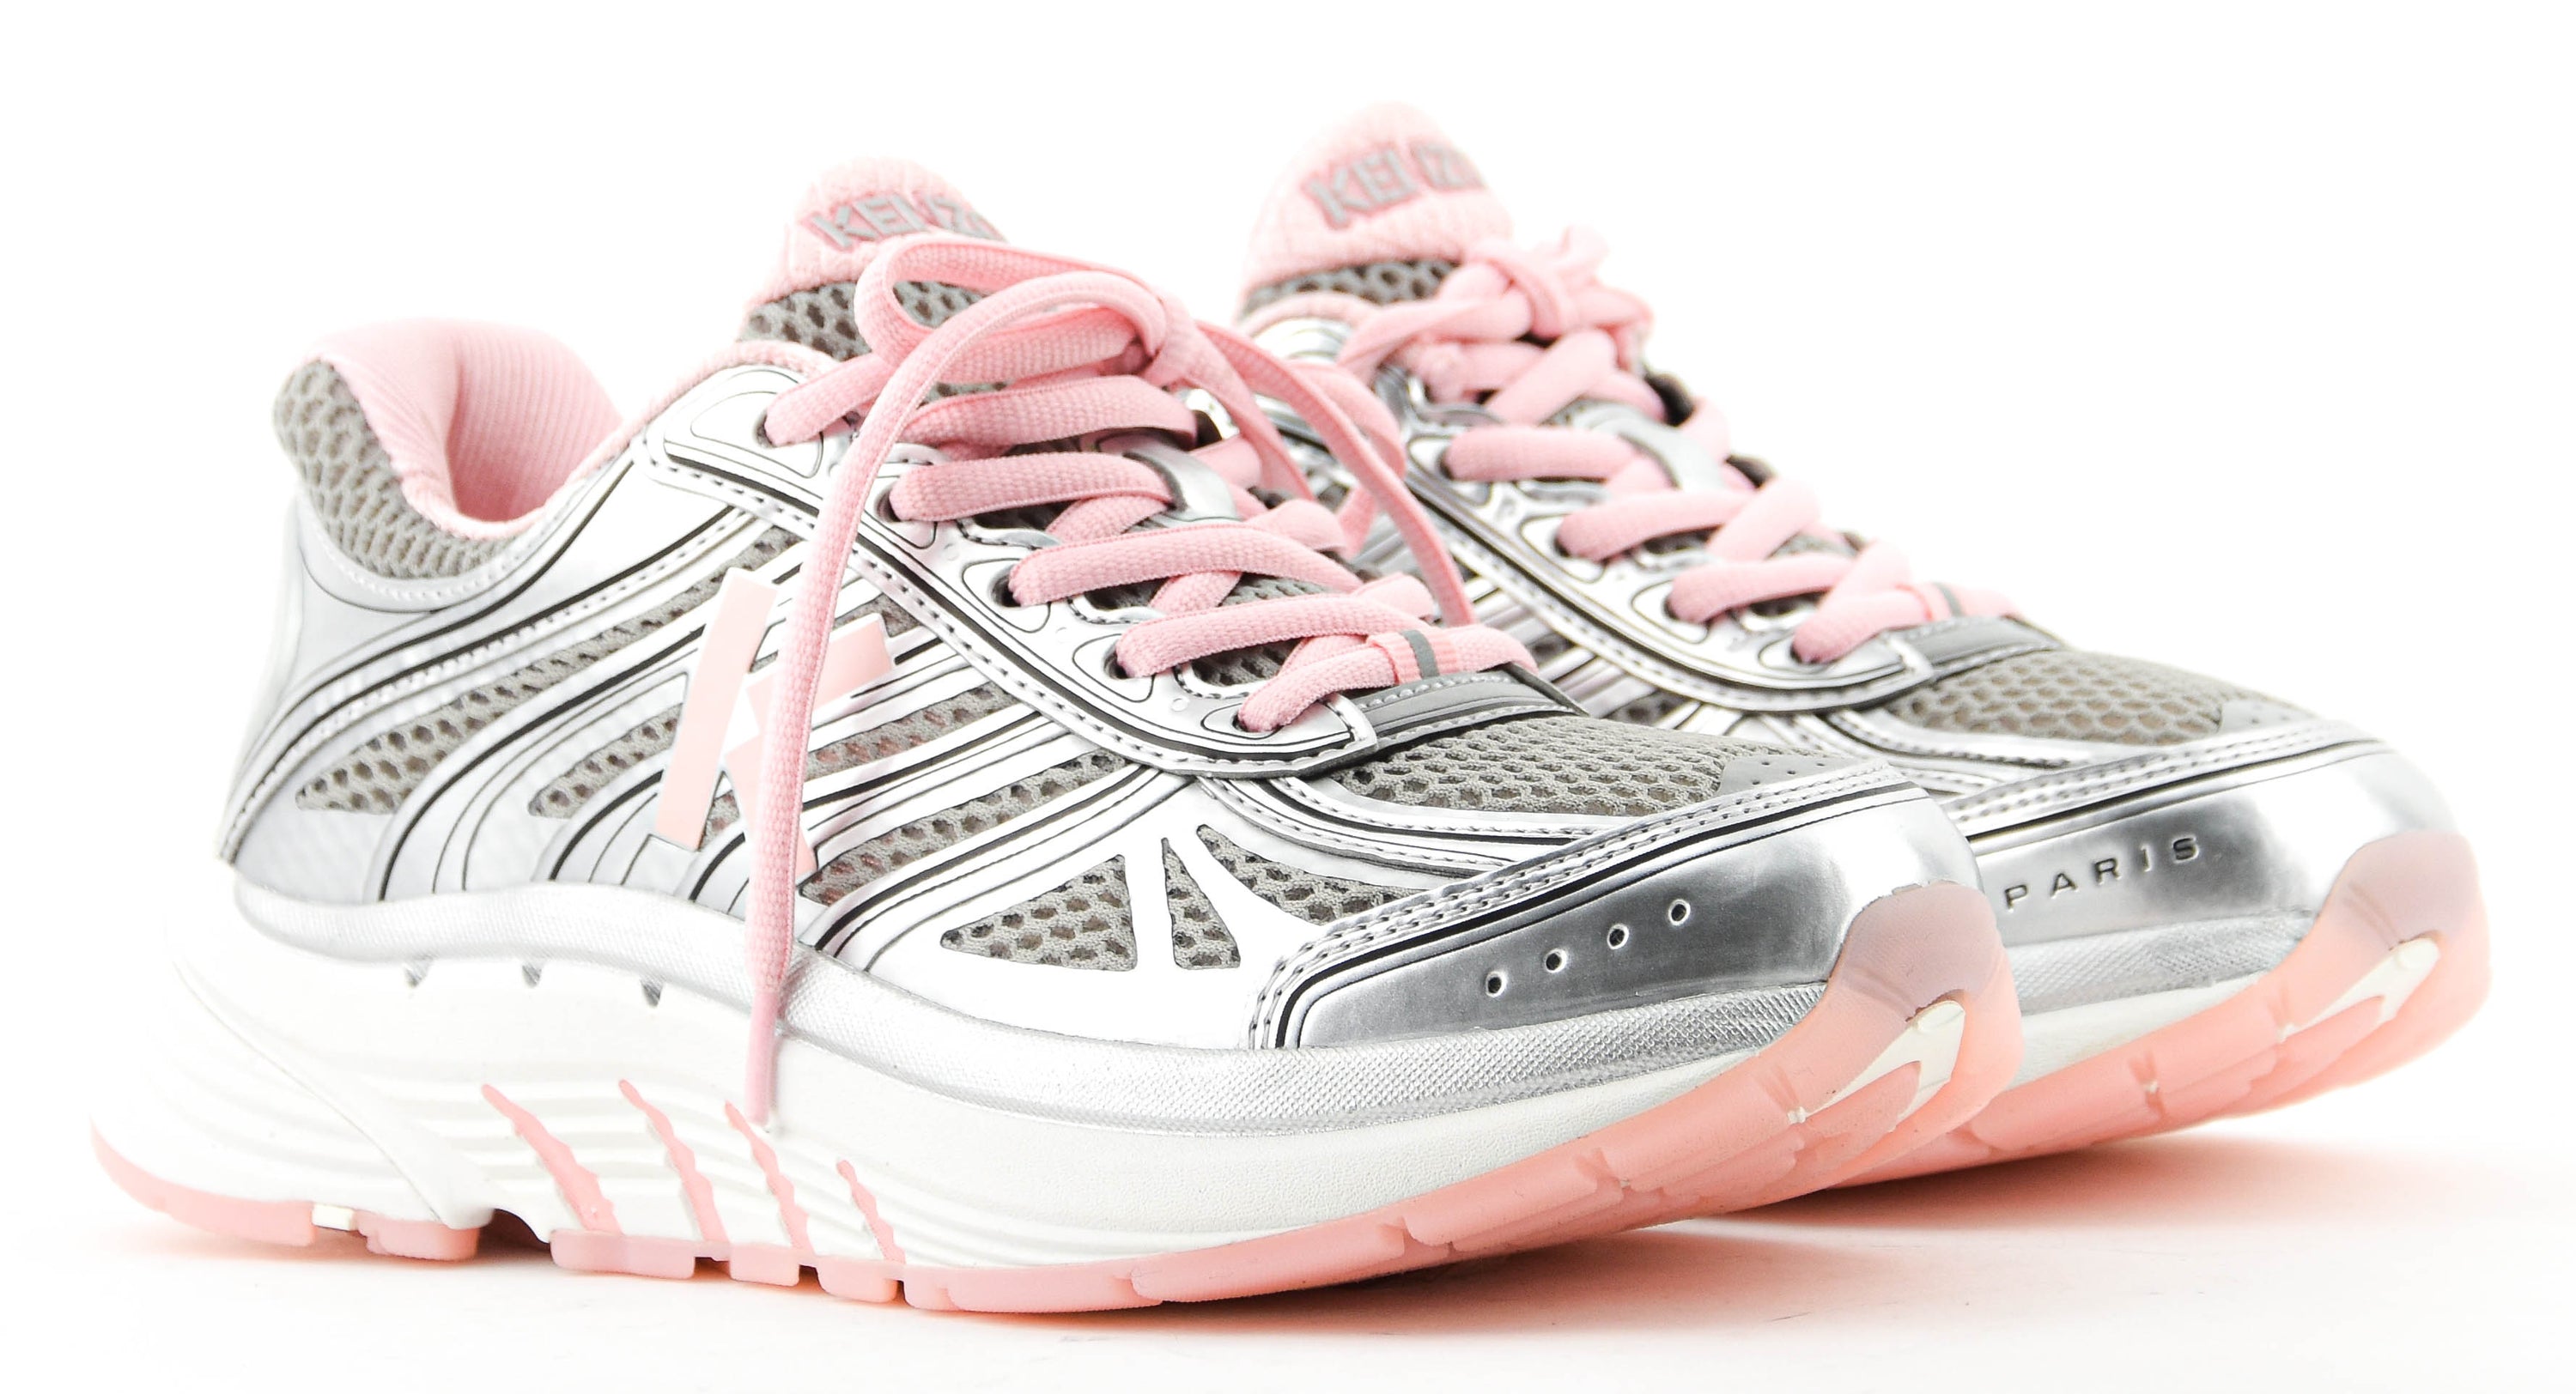 KENZO PACE TRAINER PINK/SILVER